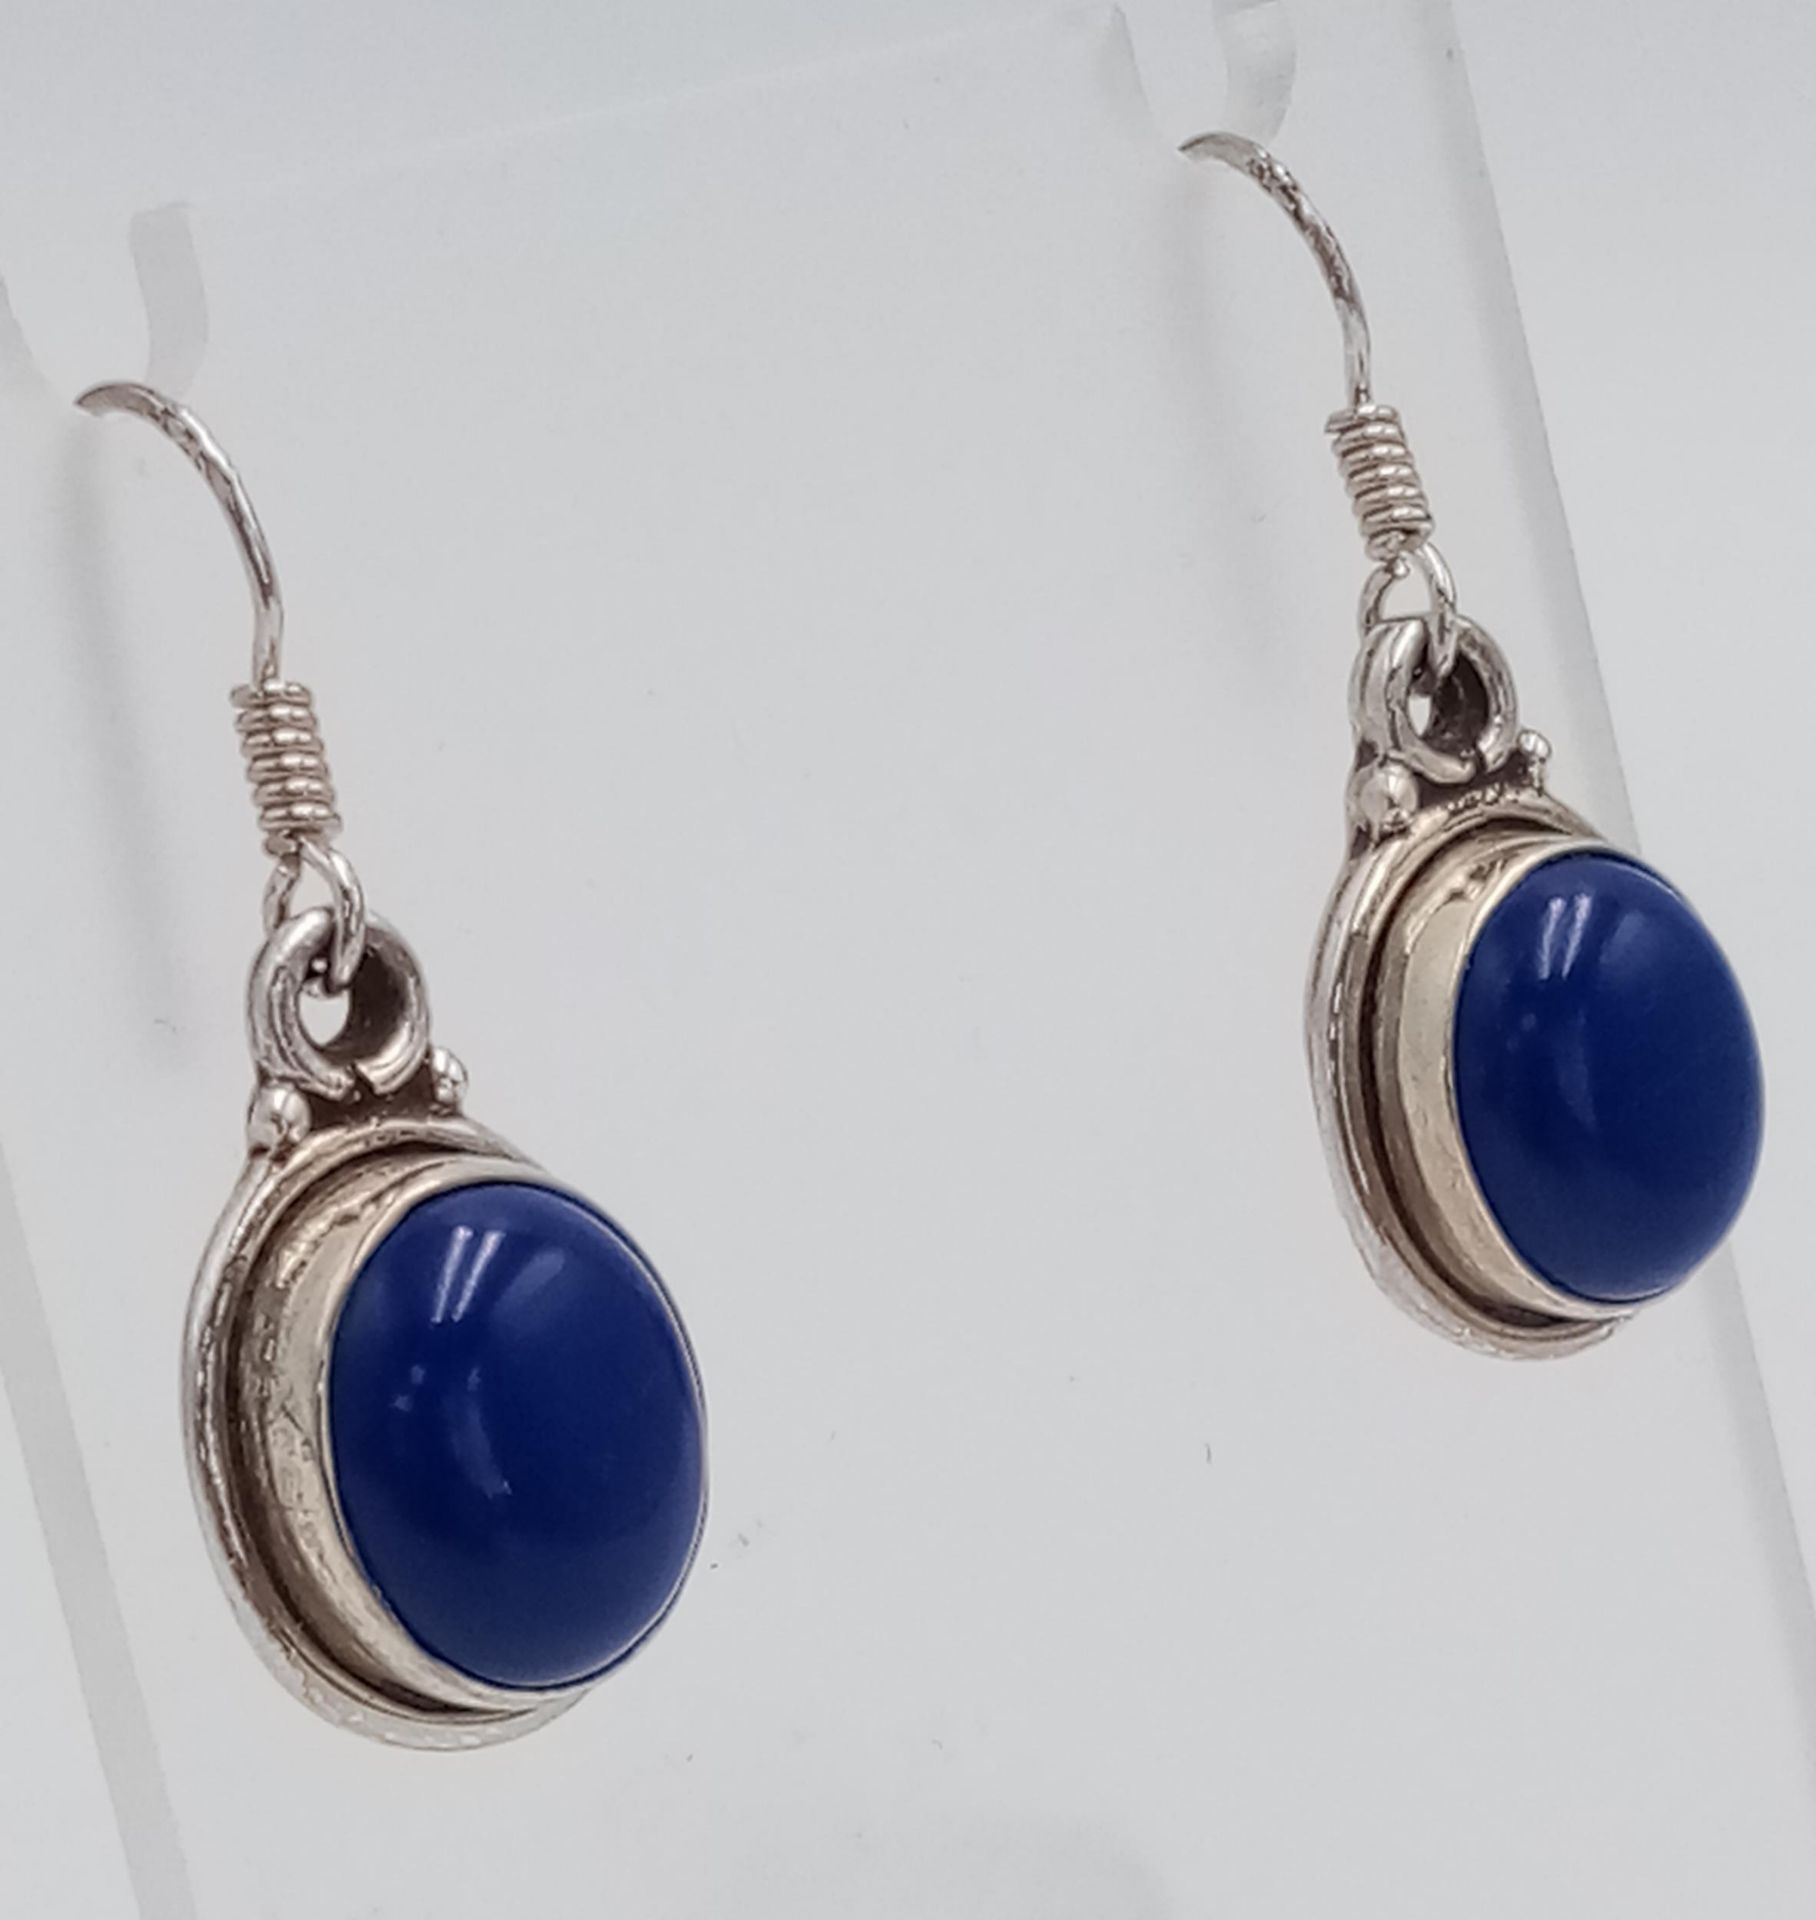 A Pair of Sterling Silver and Lapis Lazuli Cabochon Earrings. 3.4cm Drop. Set with 1.3cm Lapis